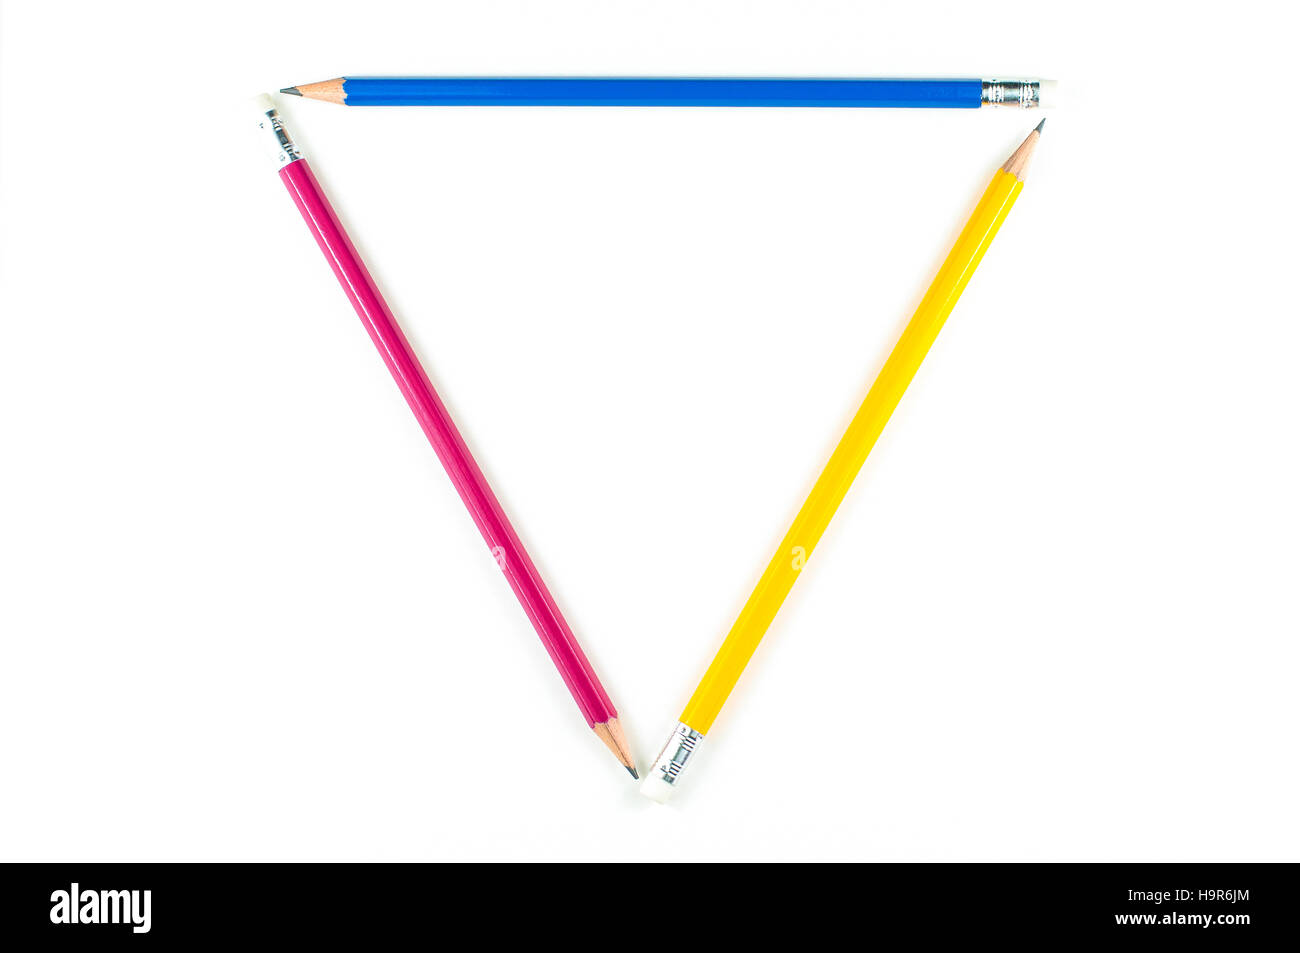 Triangle of major color pencil on white background. Stock Photo